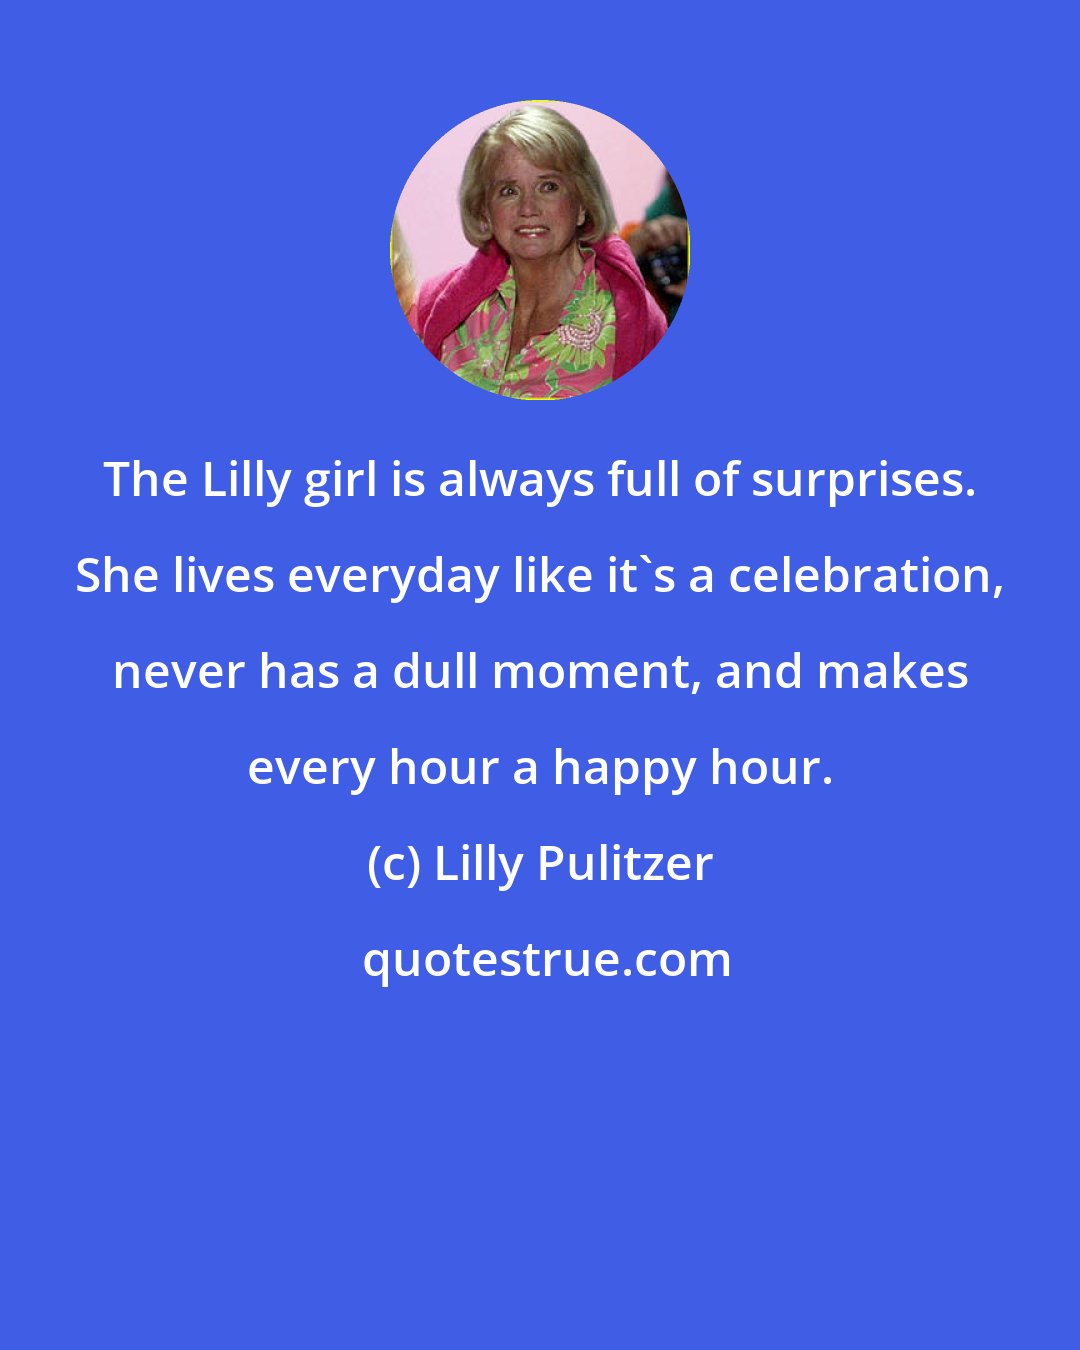 Lilly Pulitzer: The Lilly girl is always full of surprises. She lives everyday like it's a celebration, never has a dull moment, and makes every hour a happy hour.